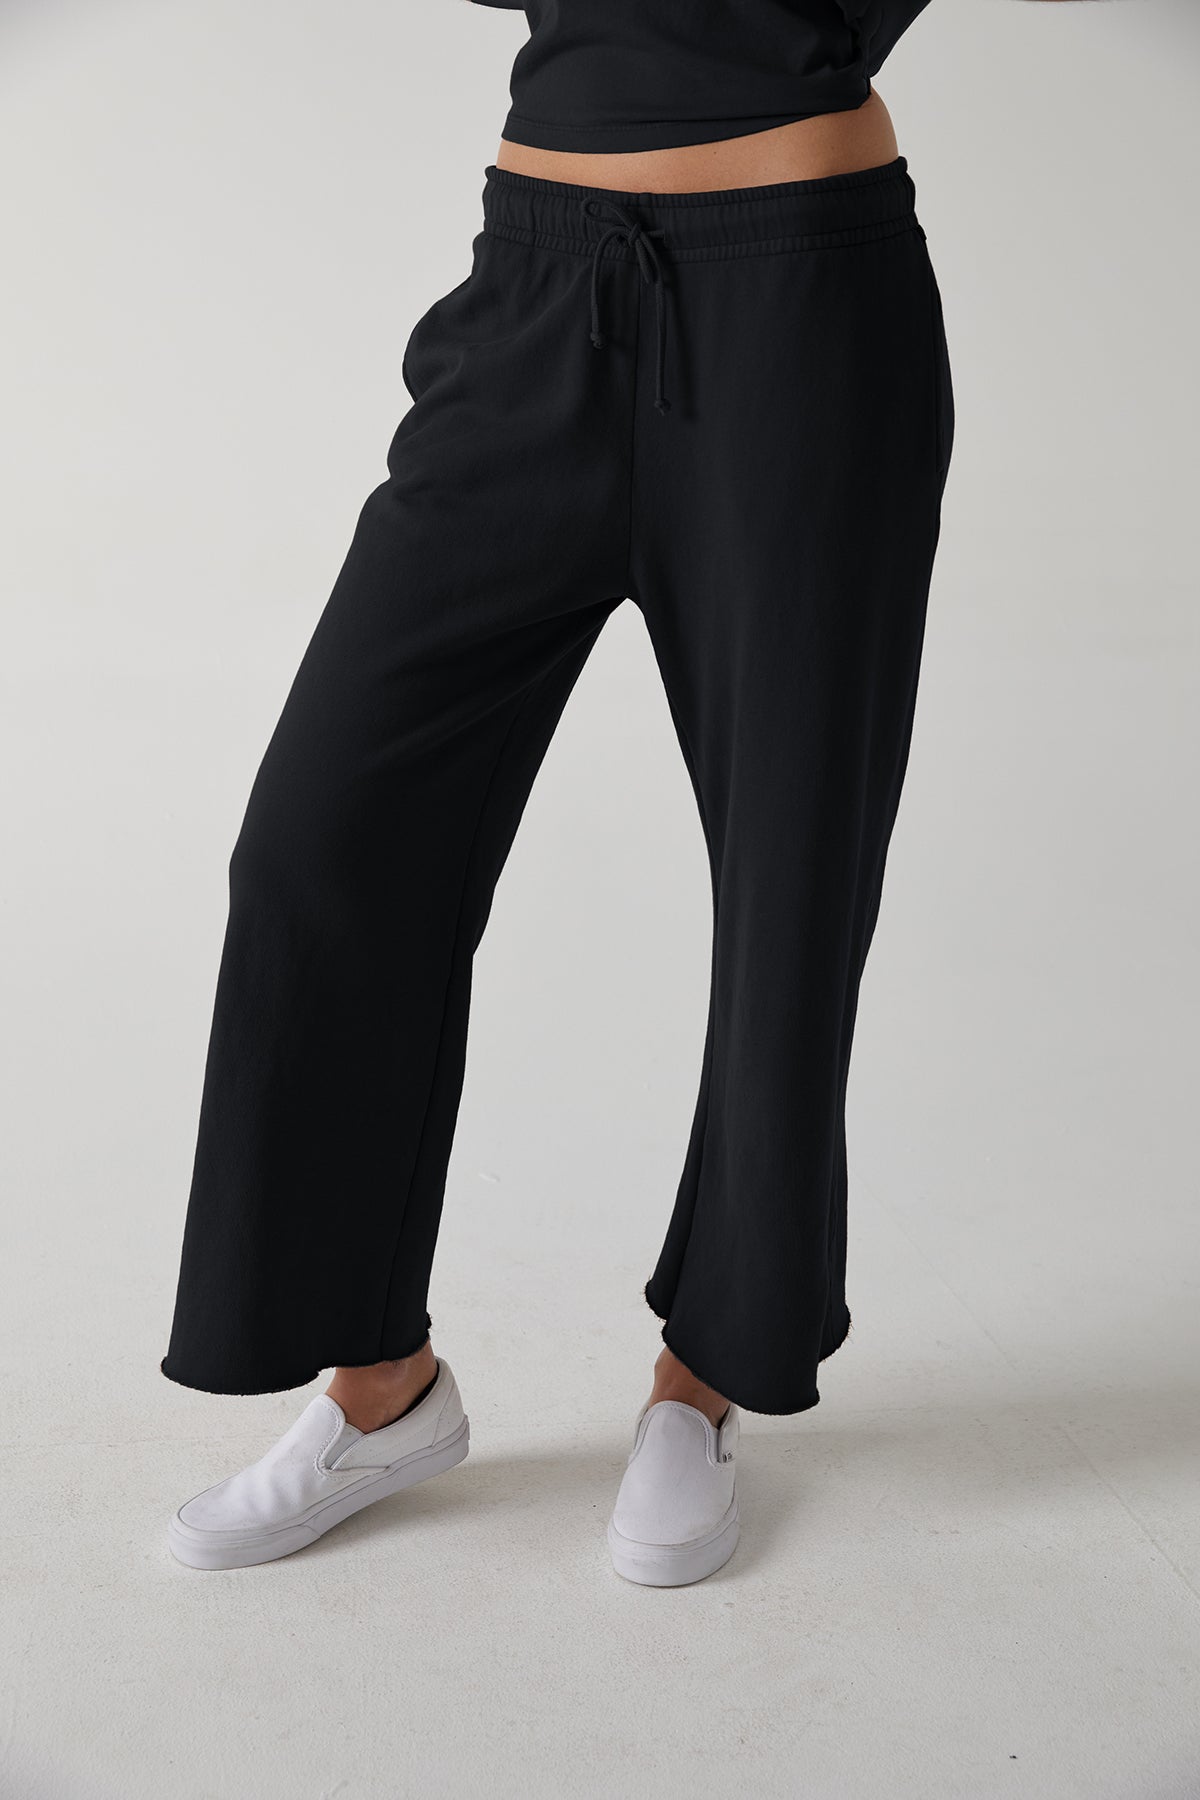 a woman wearing black Velvet by Jenny Graham Montecito sweatpants and a white t - shirt.-24331160715457